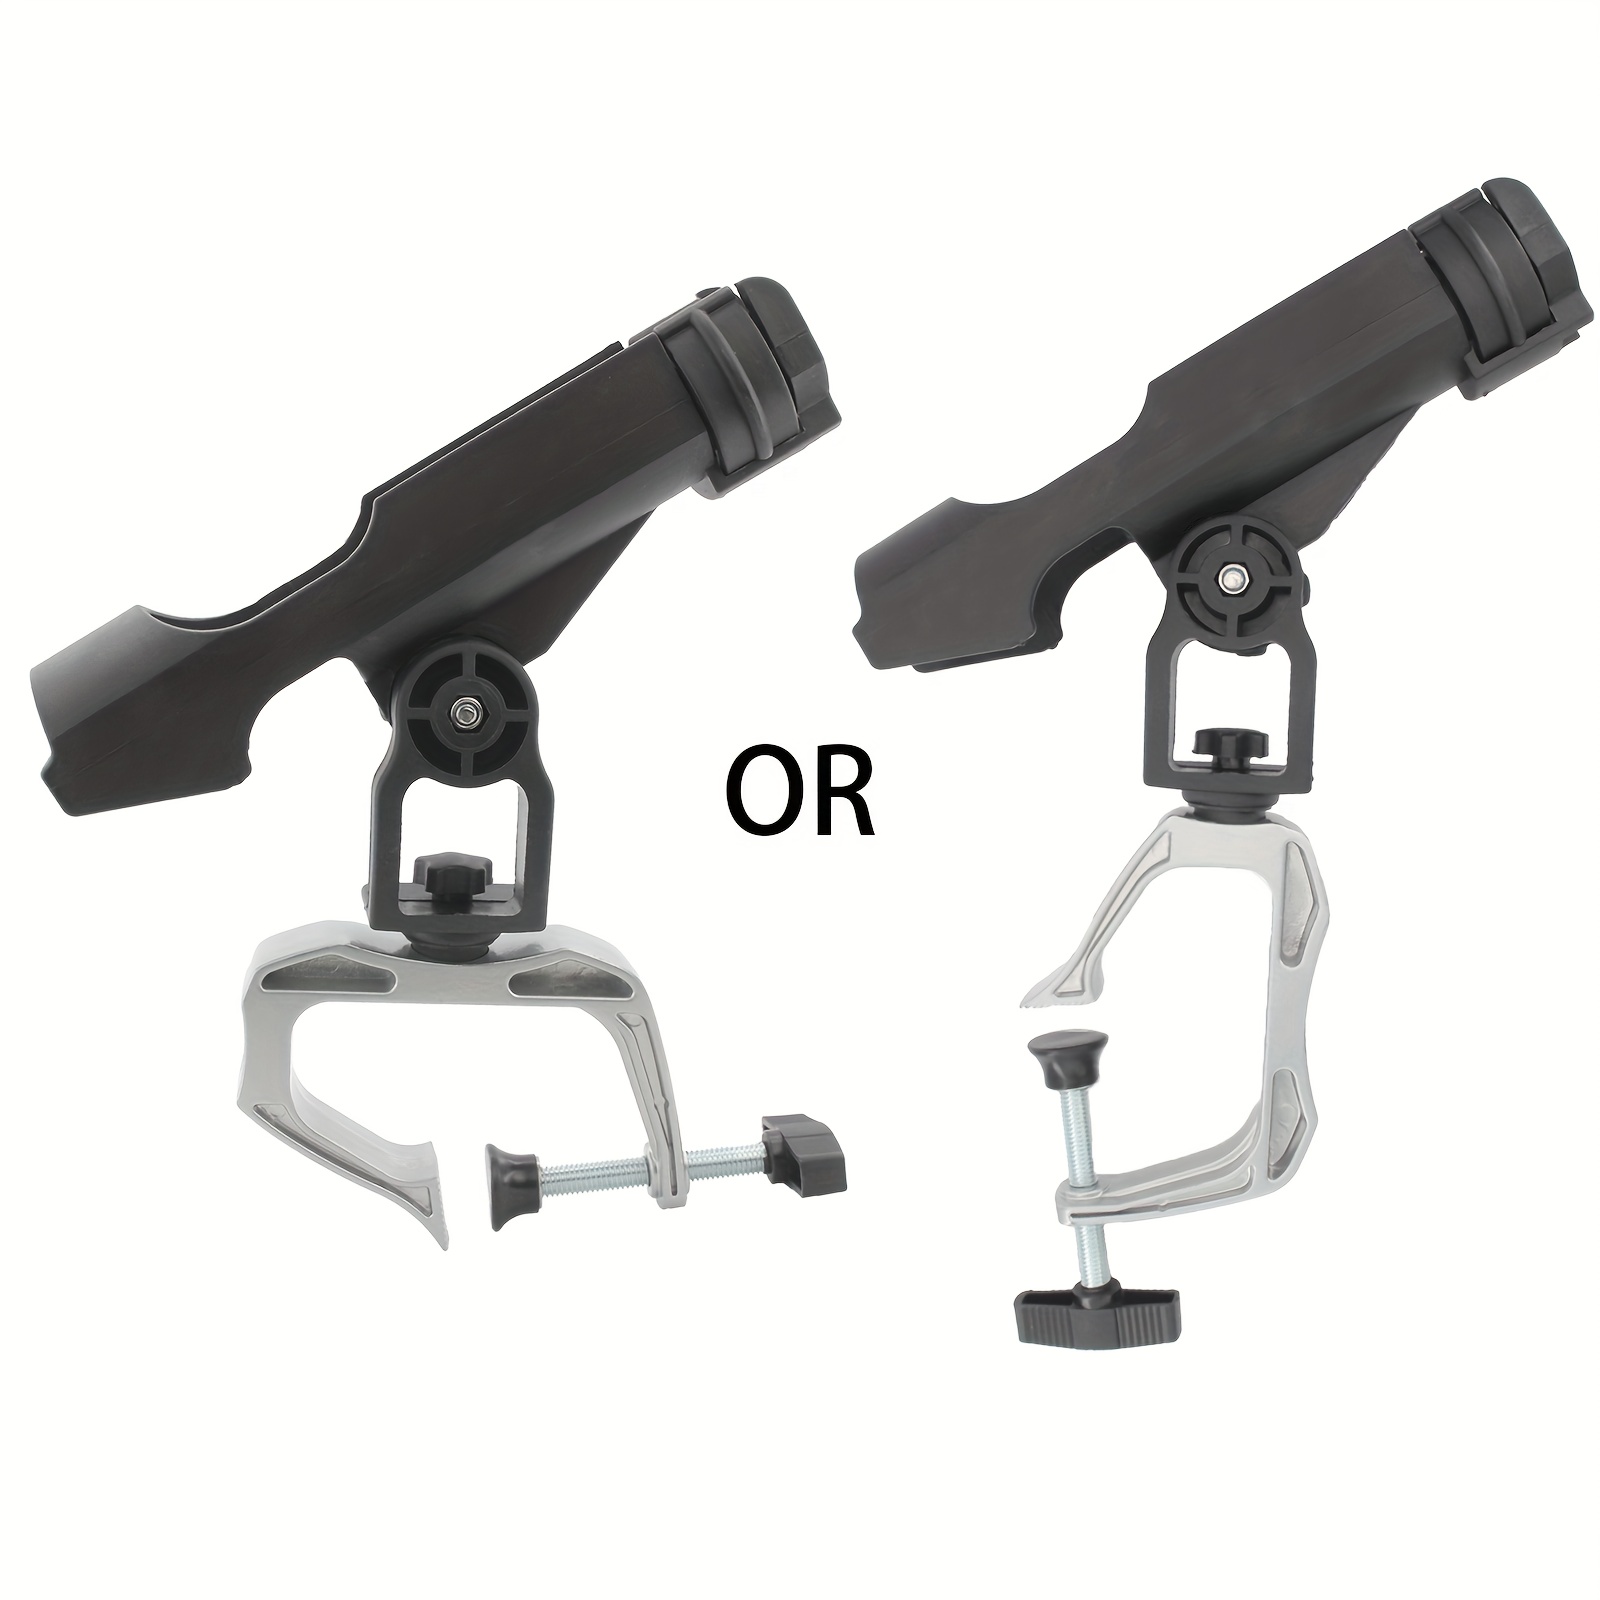  Cooltto Fishing Rod Holders Boats 2 Pack Large Clamp